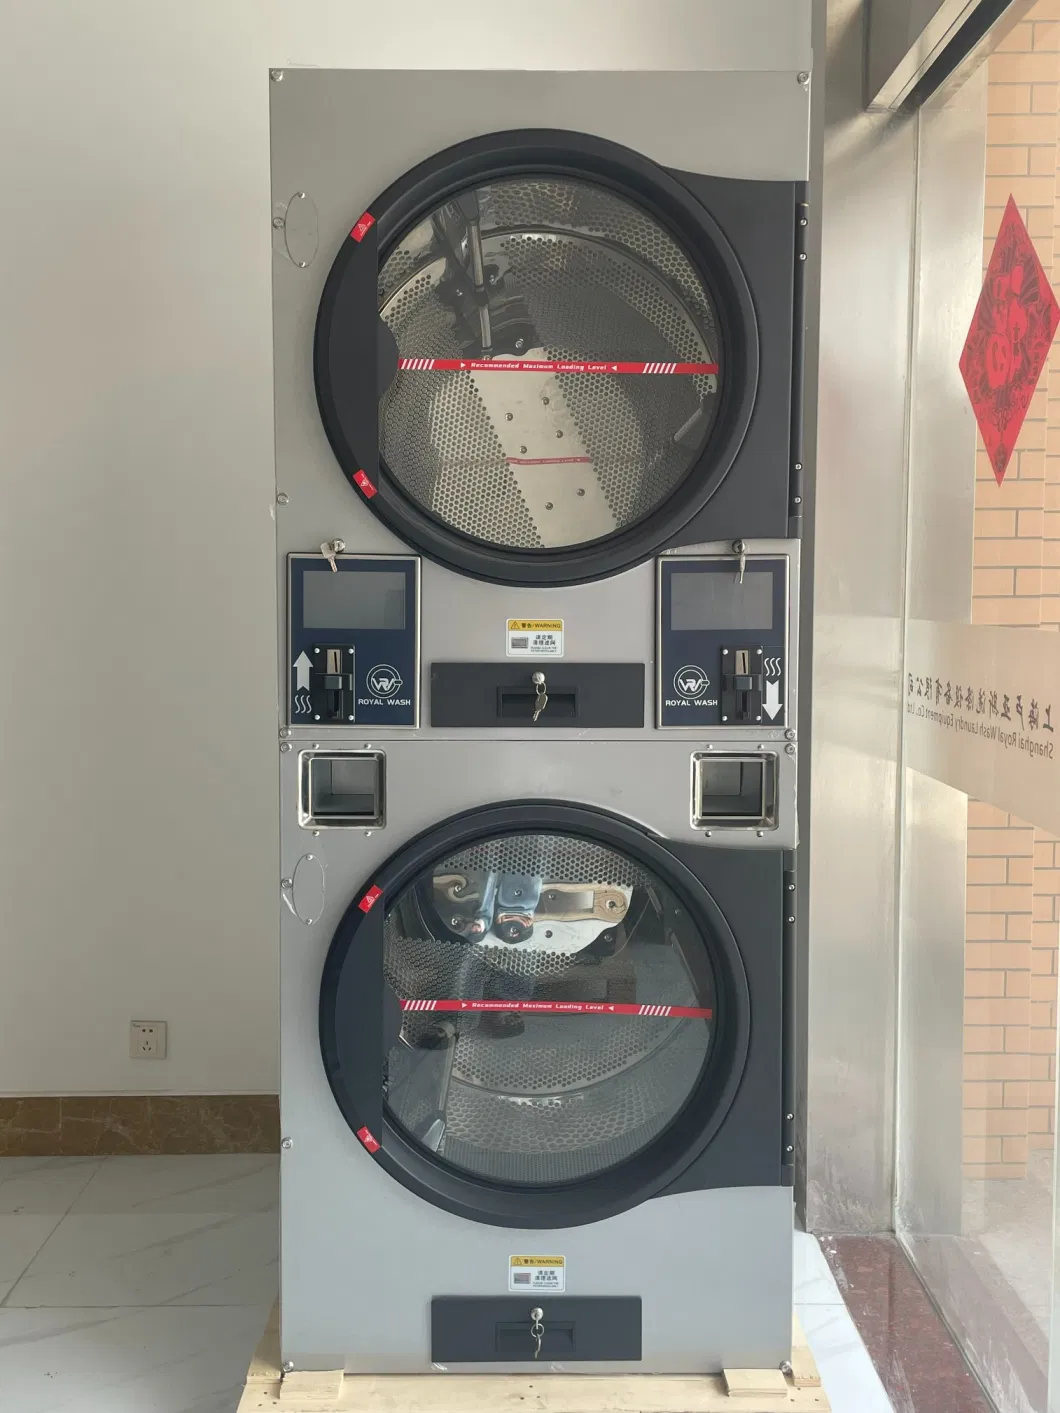 Commercial Stack Dryer Machine Laundry Equipment Wholesale